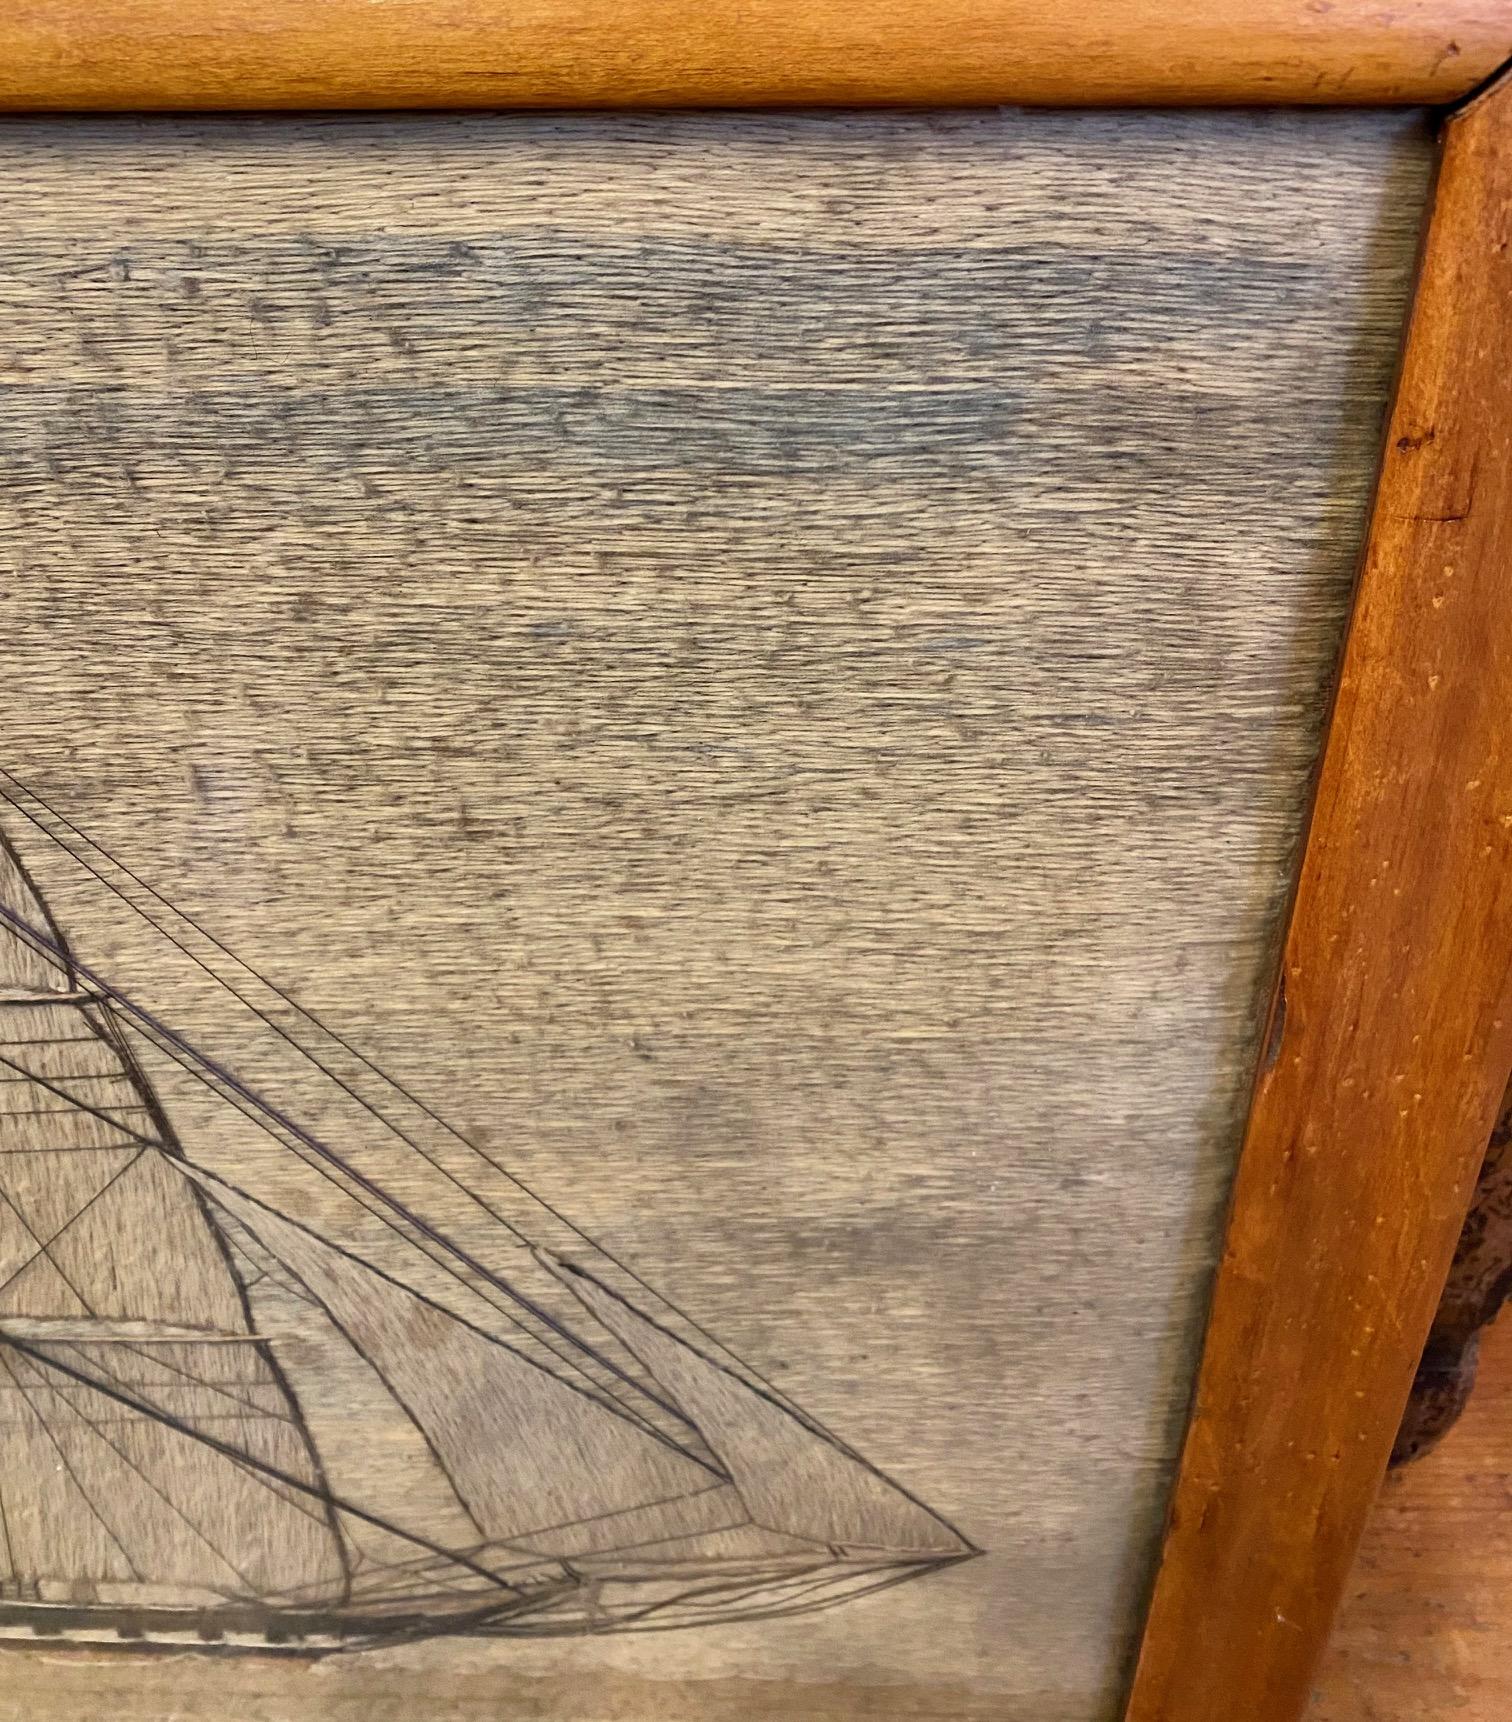 19th Century Sailor's Woolie of a Frigate, circa 1840, a British sailor's hand crafted woolwork depicting a British single decker frigate under full sail, flying ensign of the red fleet at the stern - a large vessel set against pastel sky and sea